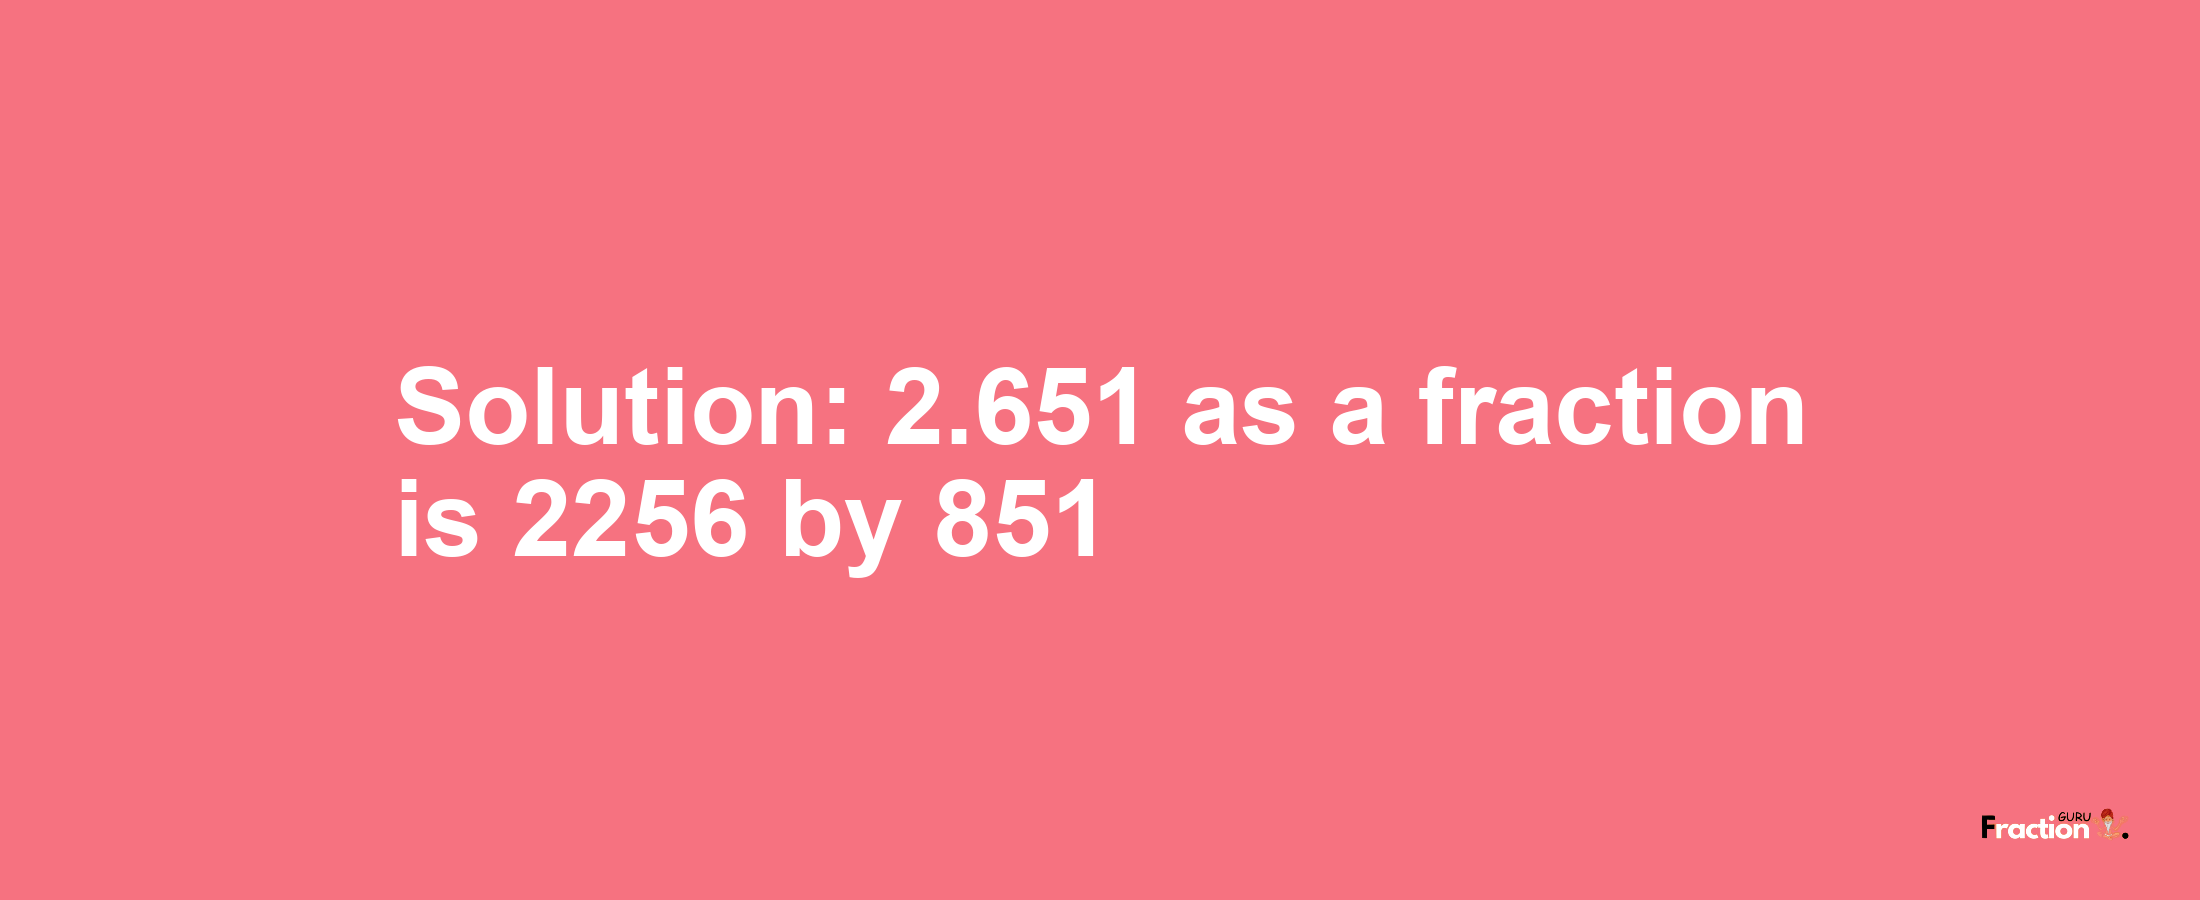 Solution:2.651 as a fraction is 2256/851